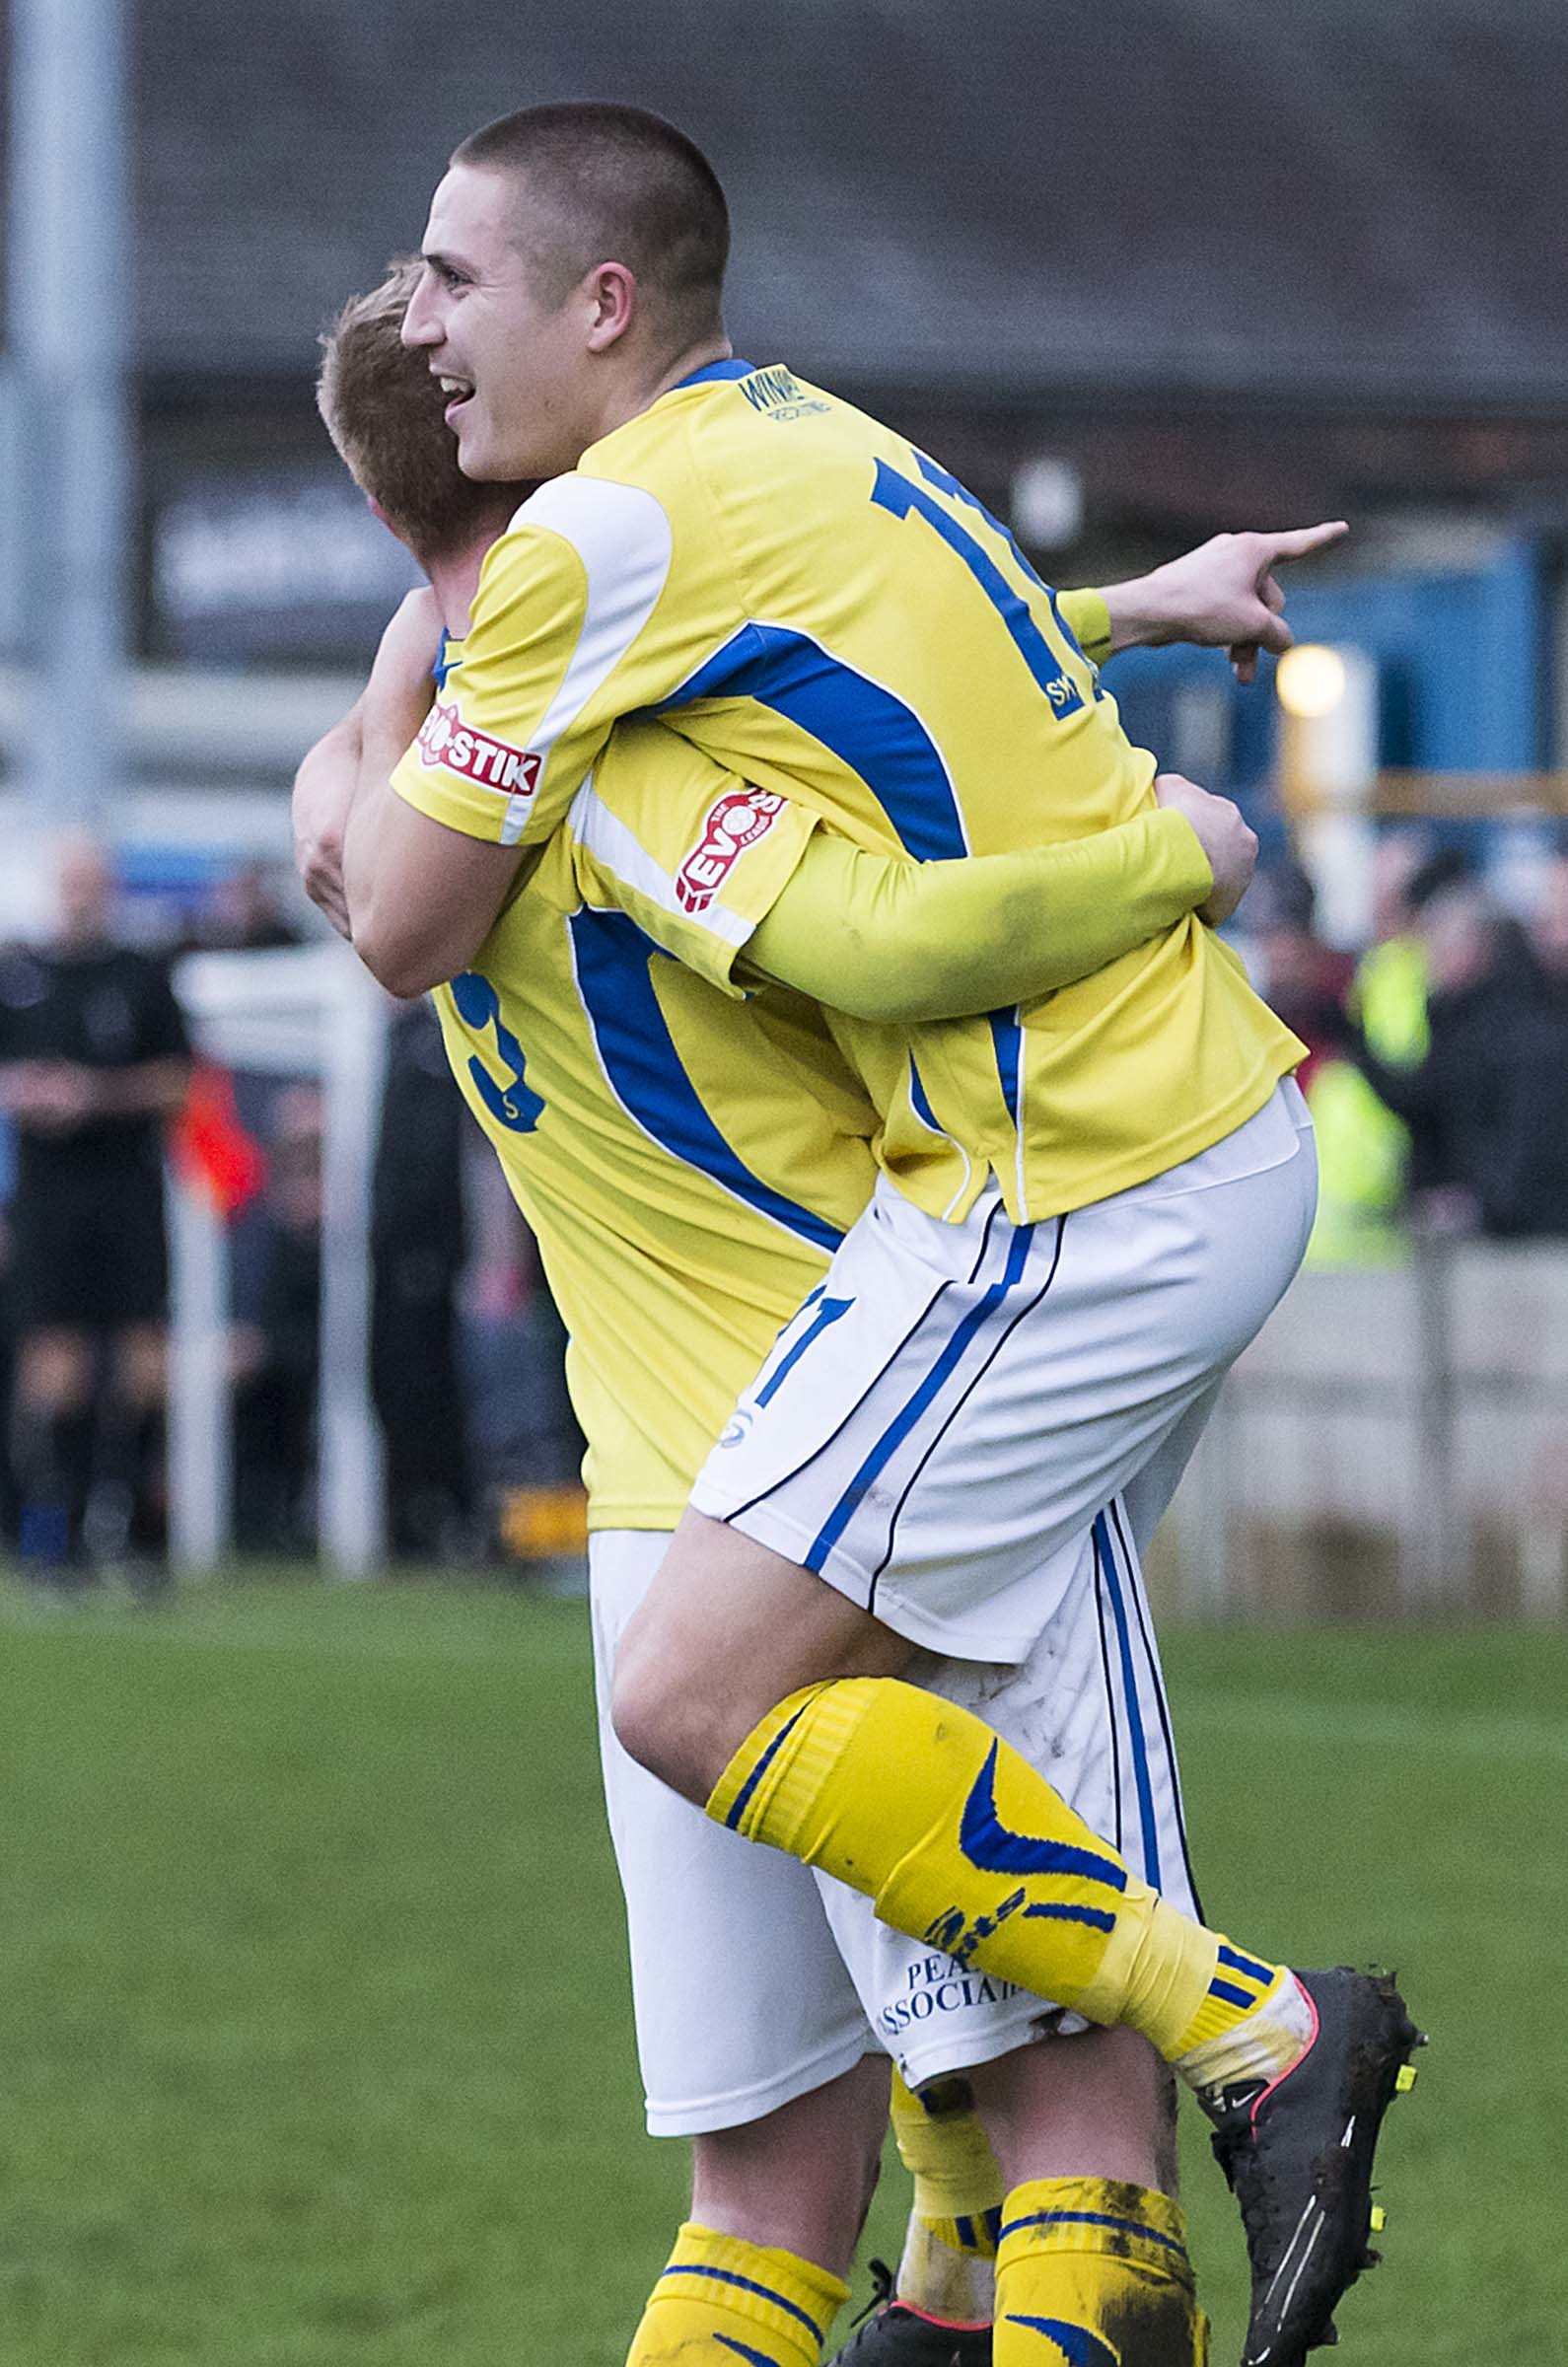 Celebrations following a goal in the 5-0 win over Clitheroe in September 2015. Picture by John Hopkins